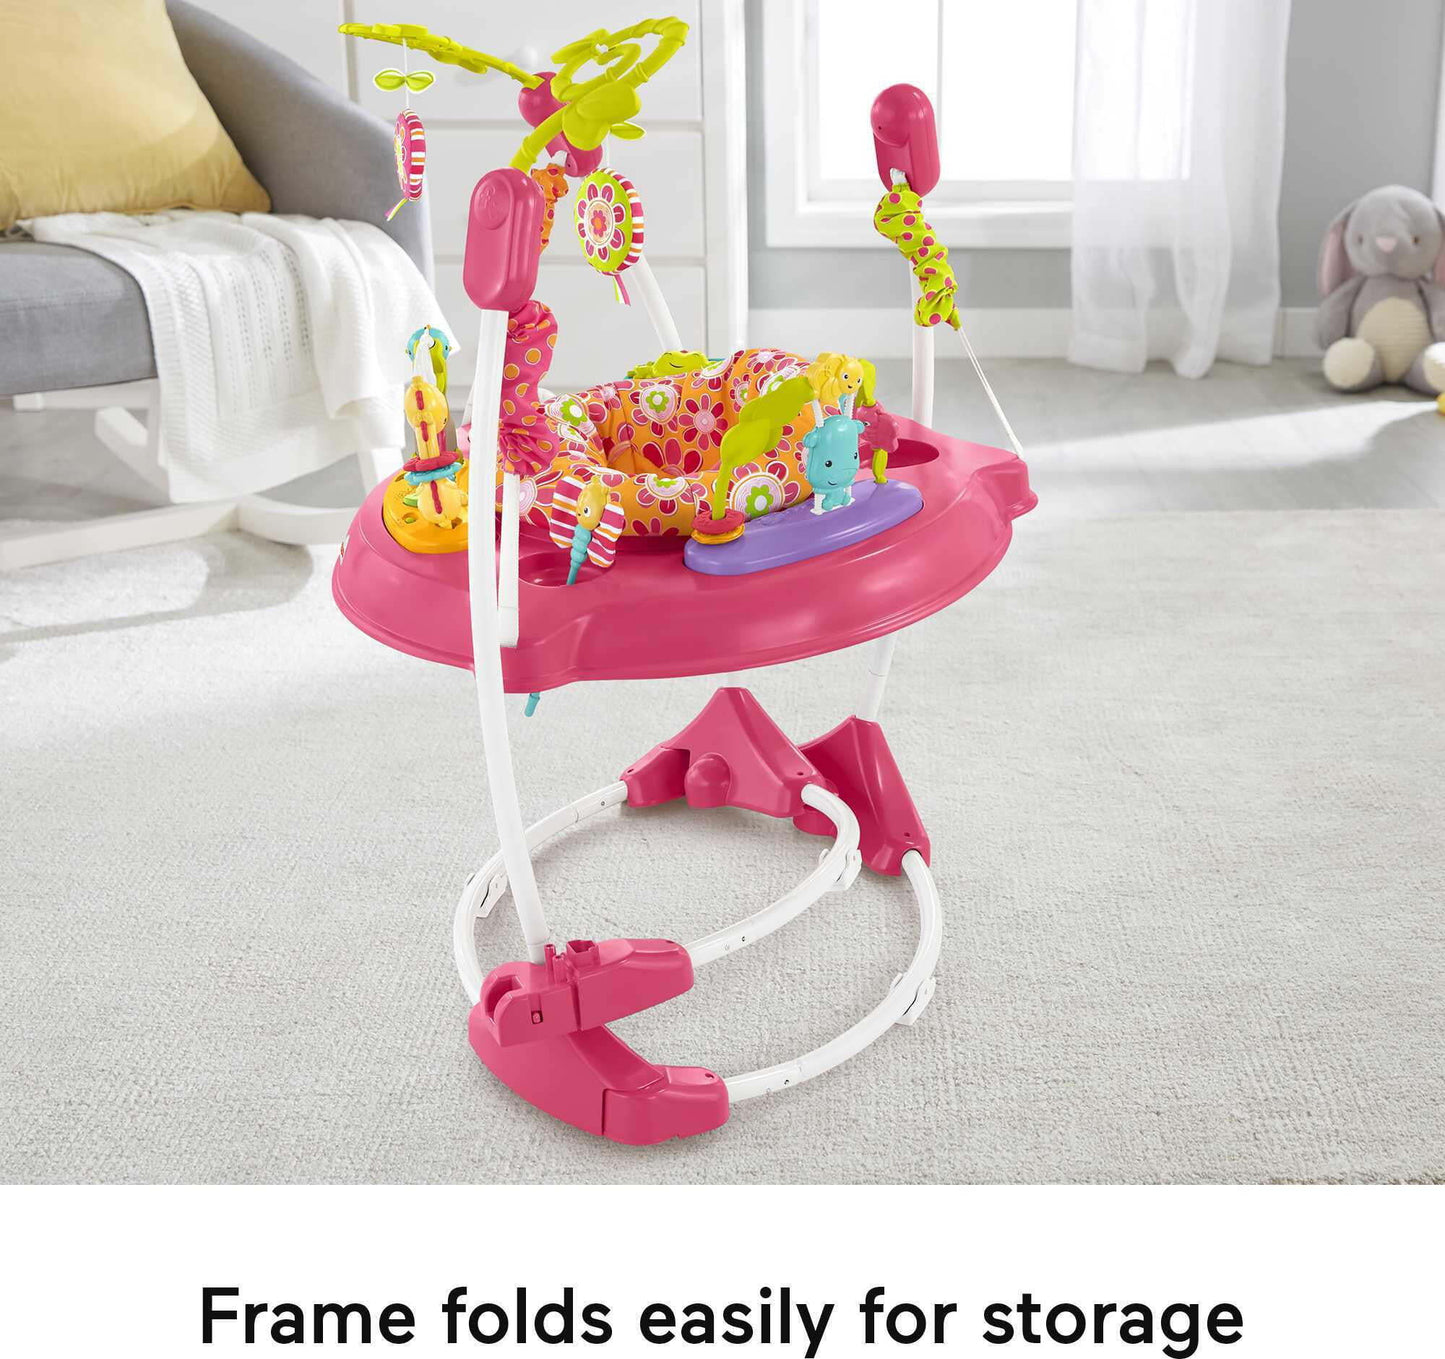 Baby Bouncer Pink Petals Jumperoo Activity Center with Music and Lights